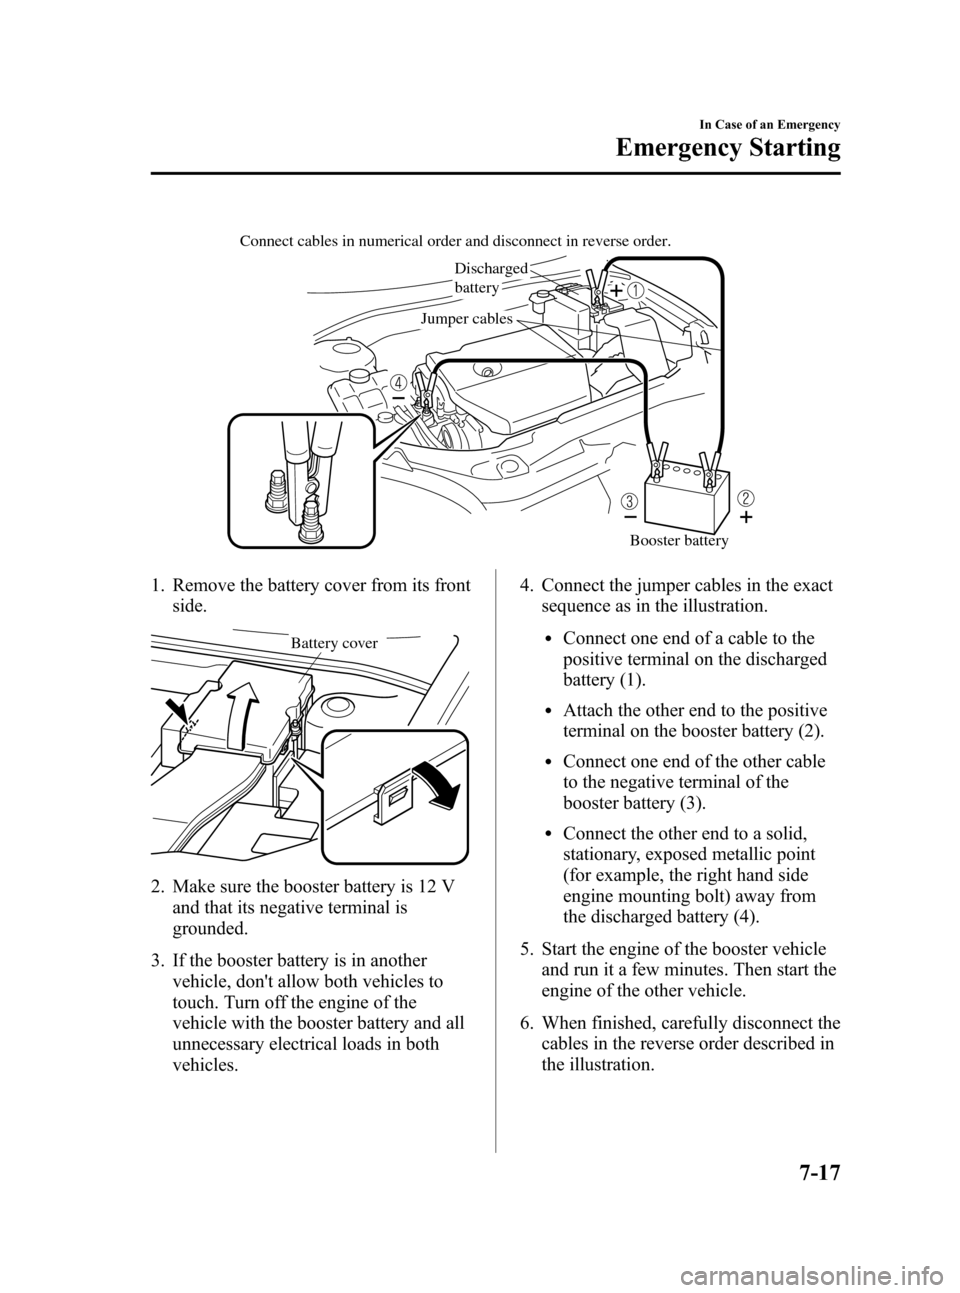 MAZDA MODEL 3 HATCHBACK 2006  Owners Manual (in English) Black plate (243,1)
Discharged 
battery
Jumper cables Connect cables in numerical order and disconnect in reverse order.
Booster battery
1. Remove the battery cover from its front
side.
Battery cover
